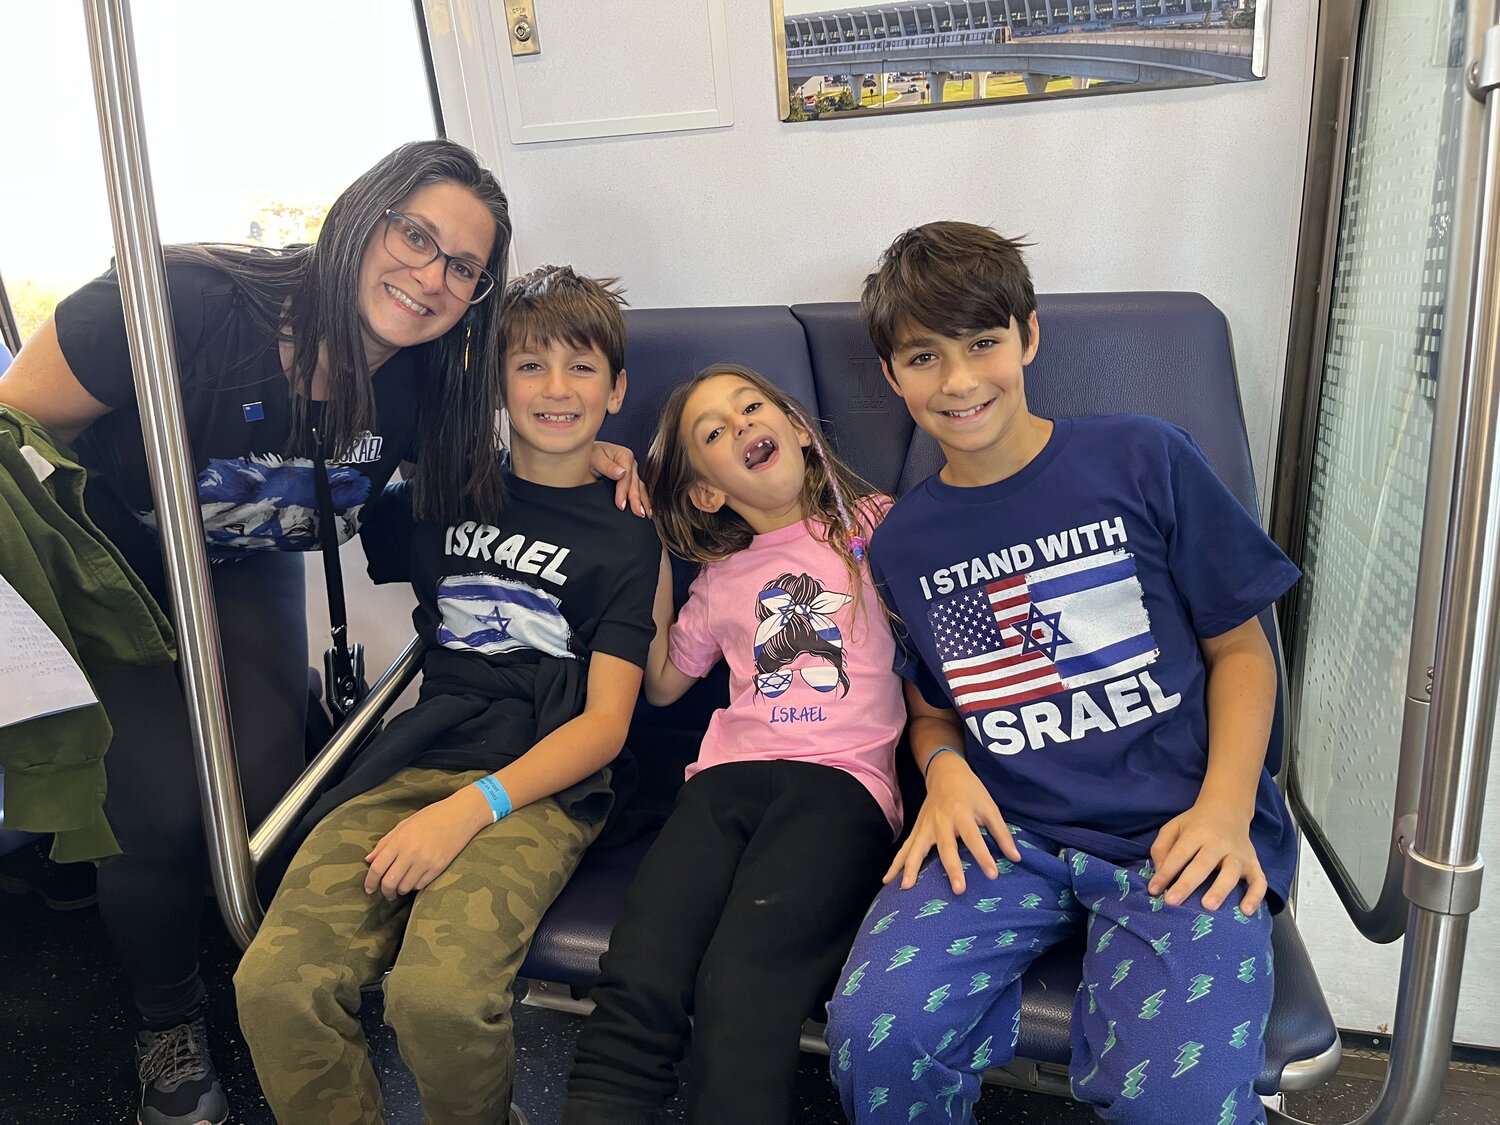 On their way to the March for Israel were Tamar, left, Simon, Maya and Matthew Barbash of Hewlett.